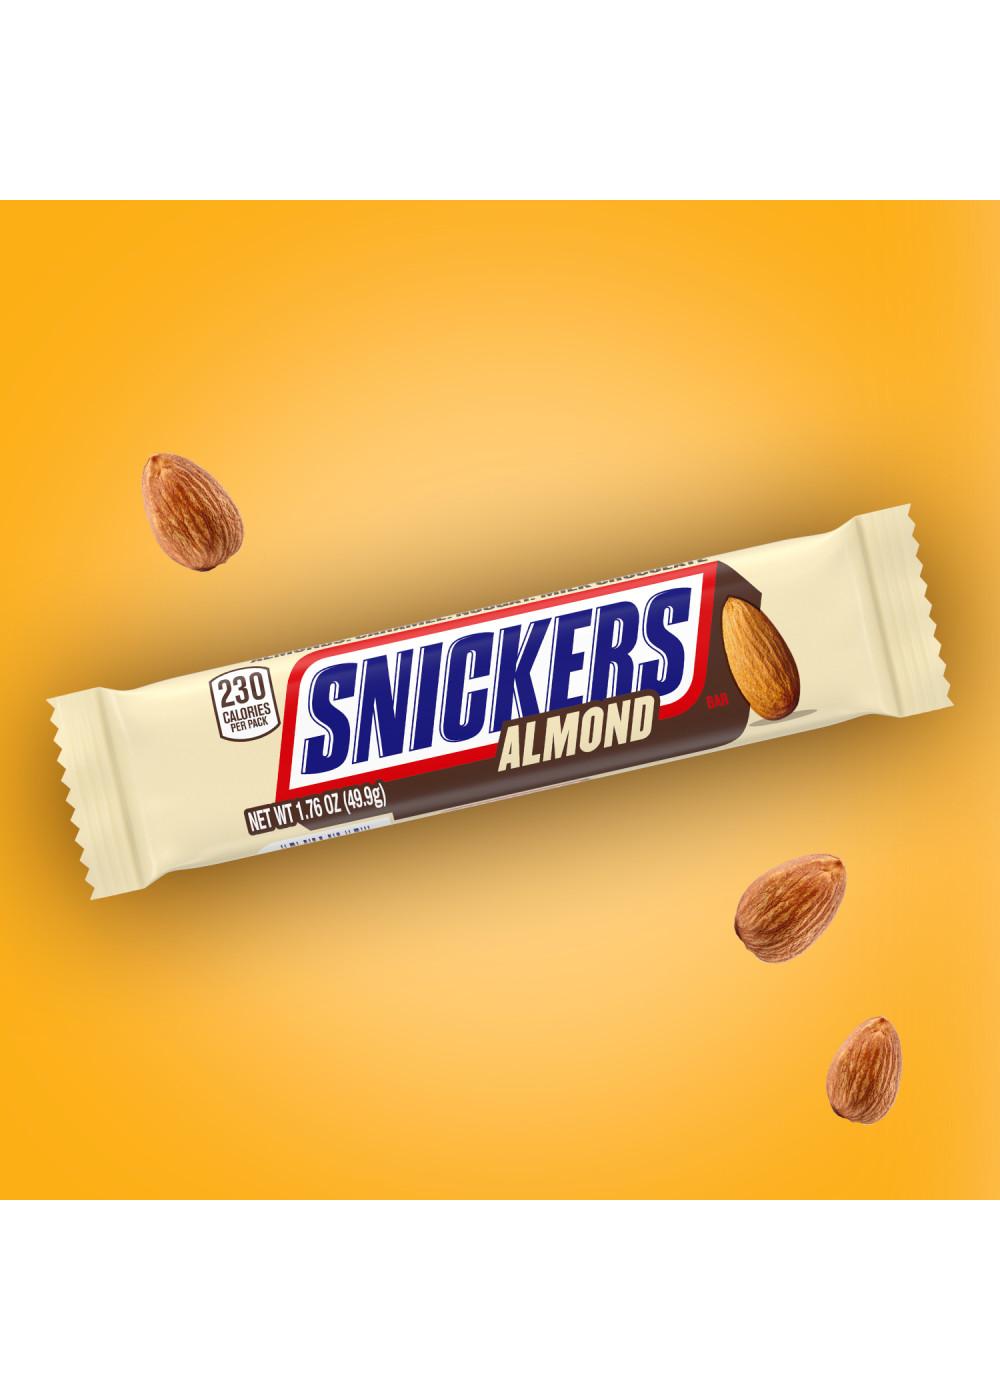 Snickers Almond Single Size Candy Bar; image 6 of 7